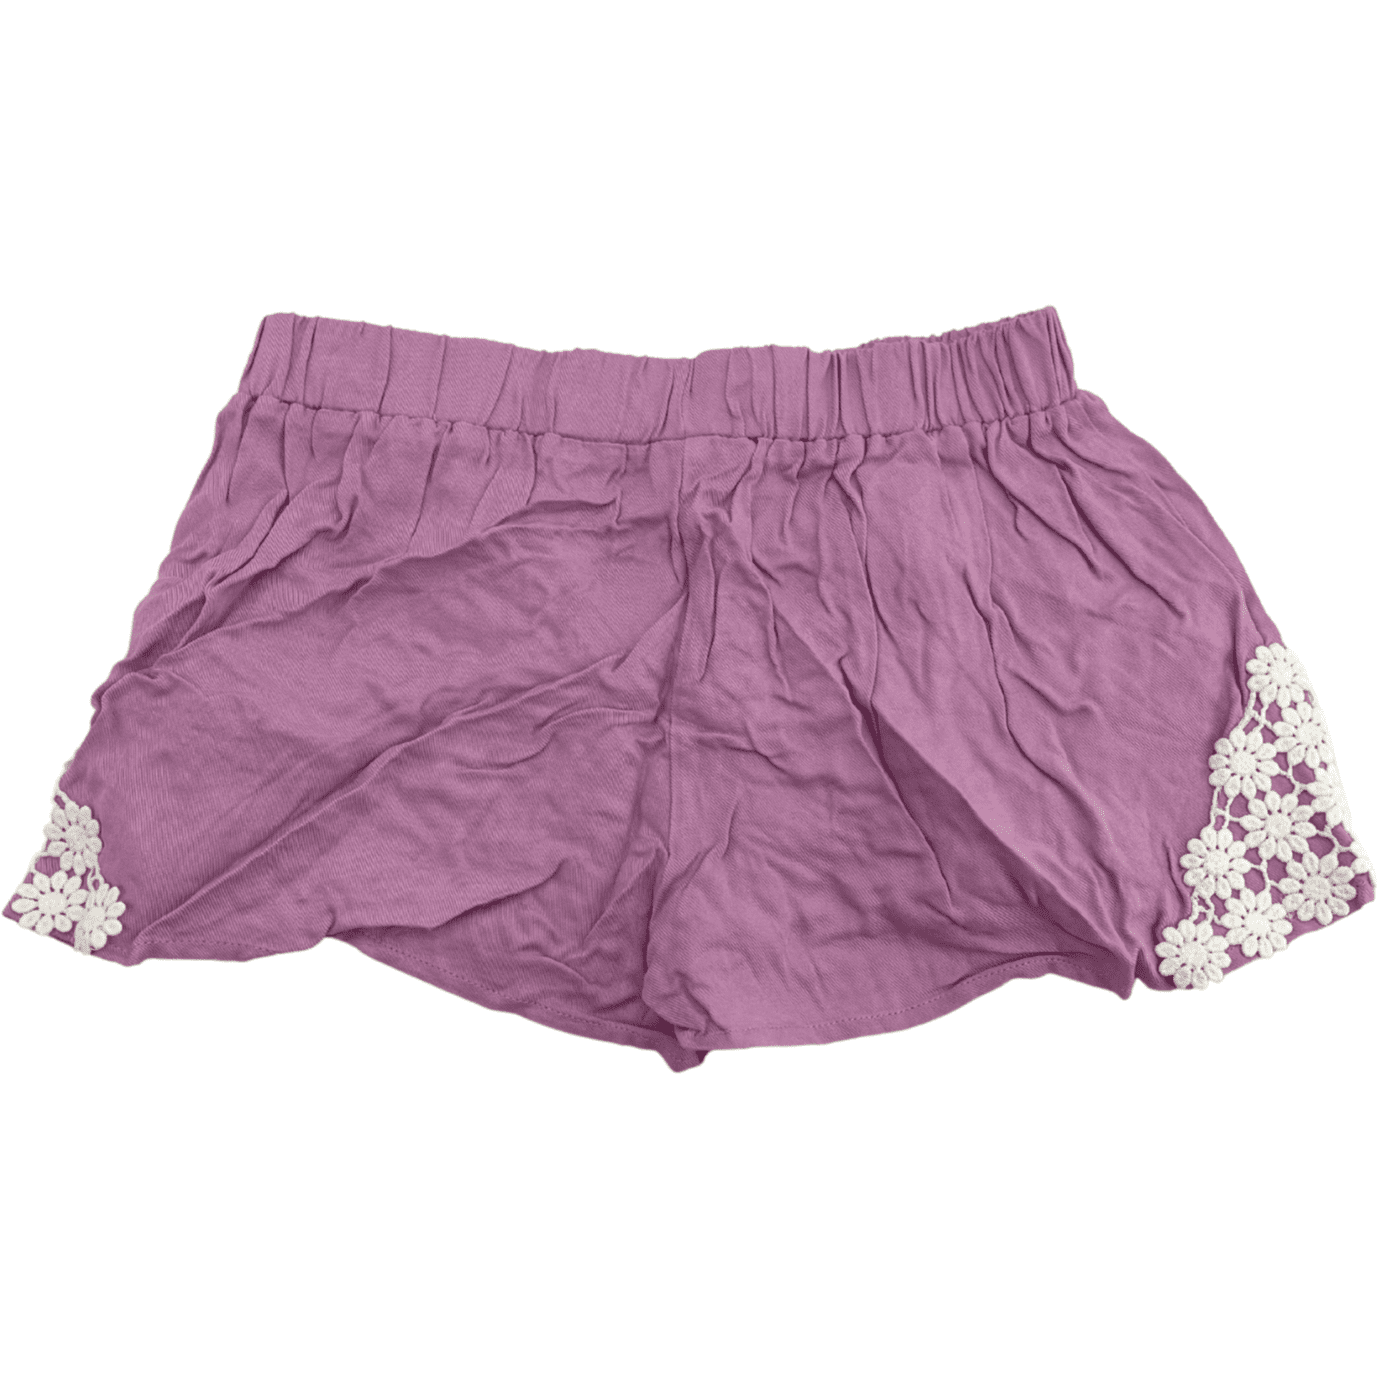 Toughskins Girl’s Shorts / Purple with White / Various Sizes ...